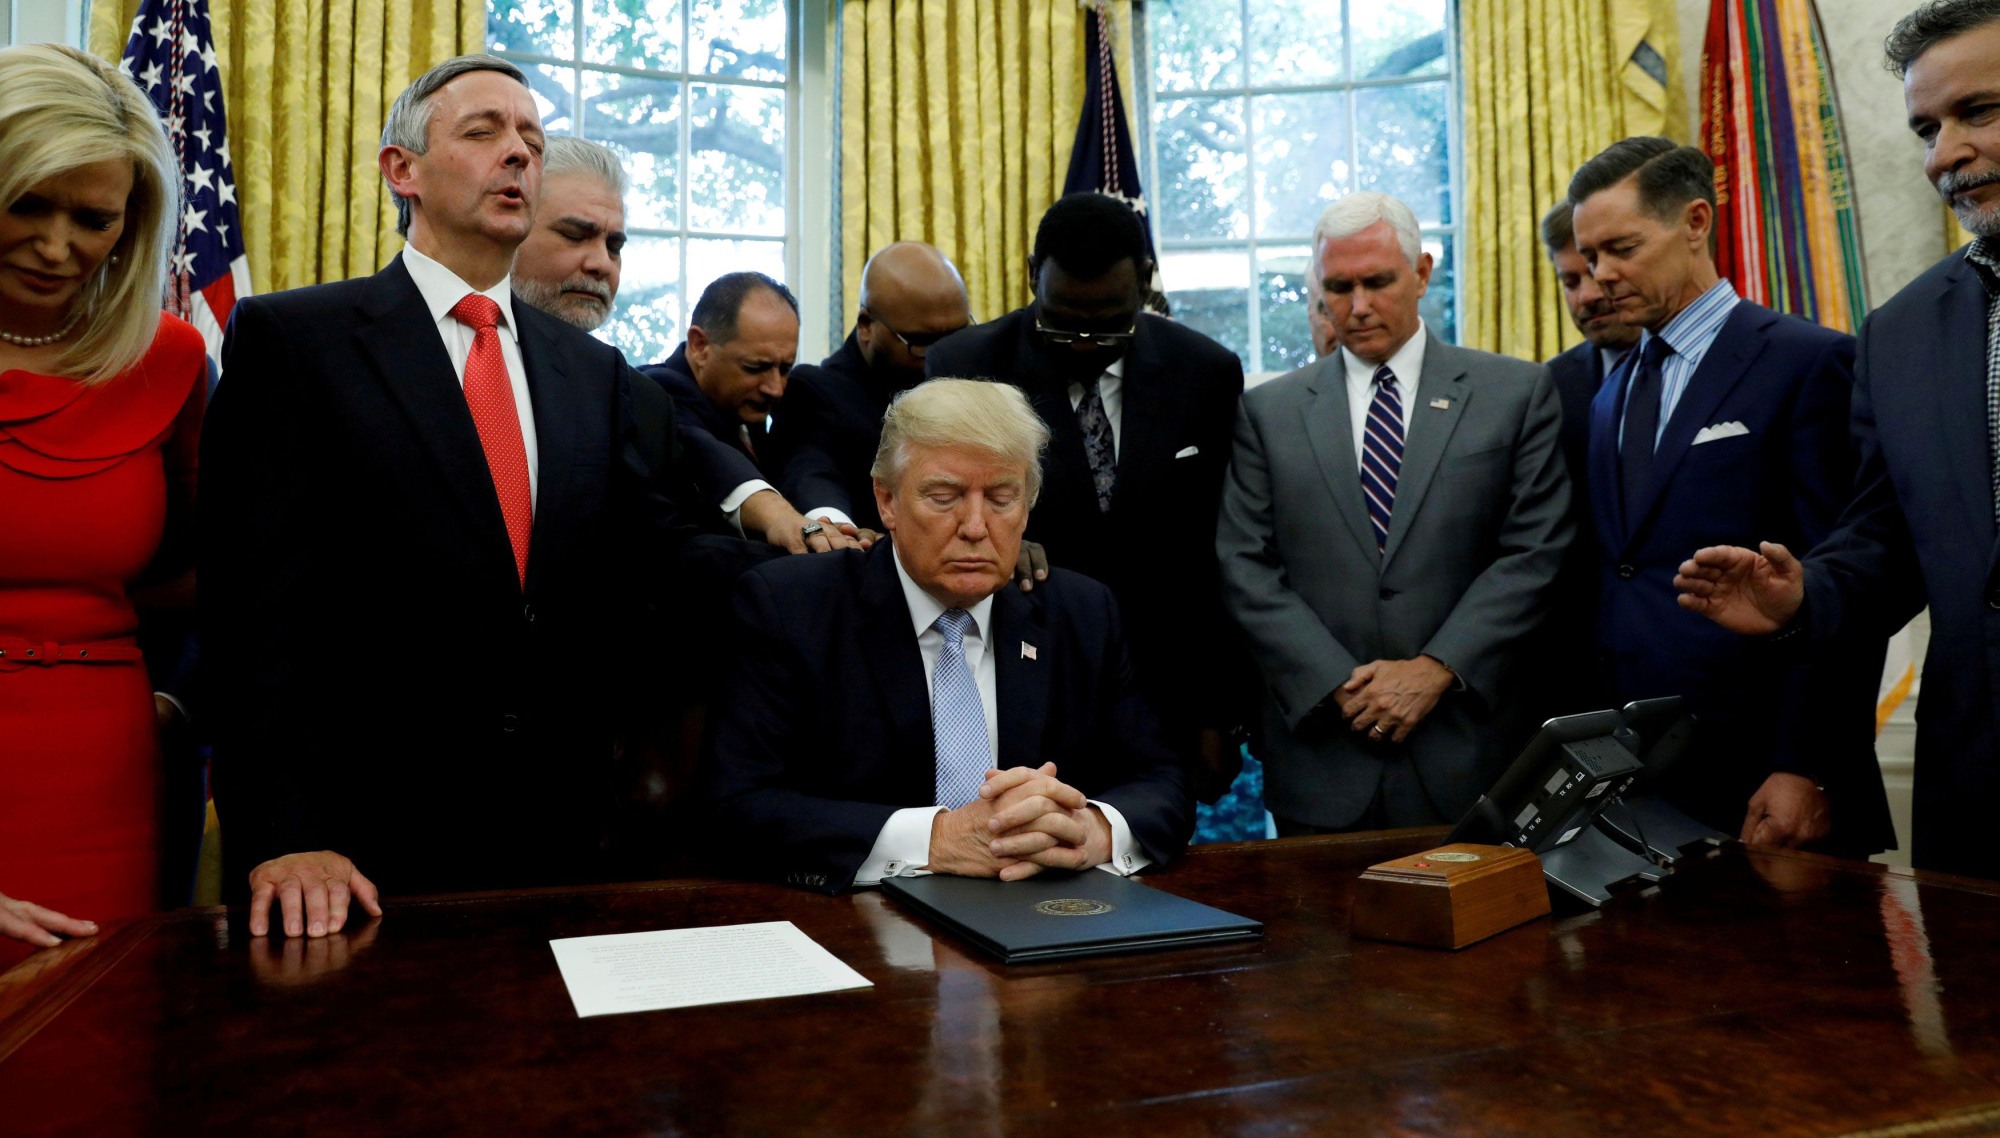 Faith leaders place their hands on the shoulders of U.S. President Donald Trump as he takes part in a prayer for those affected by Hurricane Harvey in the Oval Office of the White House in Washington in 2017. | REUTERS